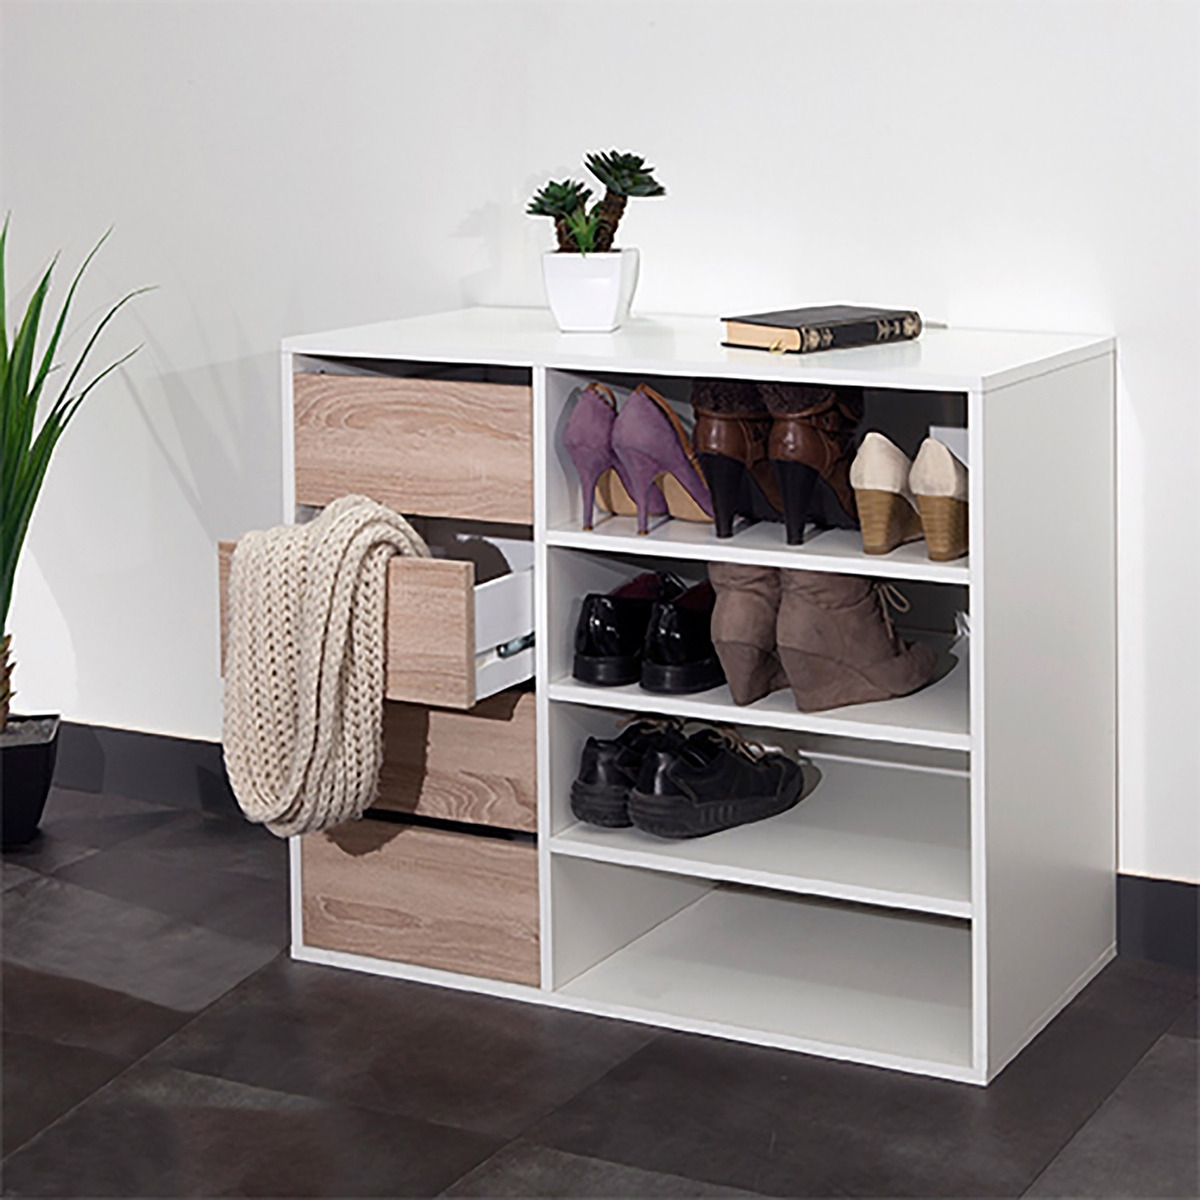 Reynal Shoe Storage Unit with 4 Drawers and Shelves - image 1